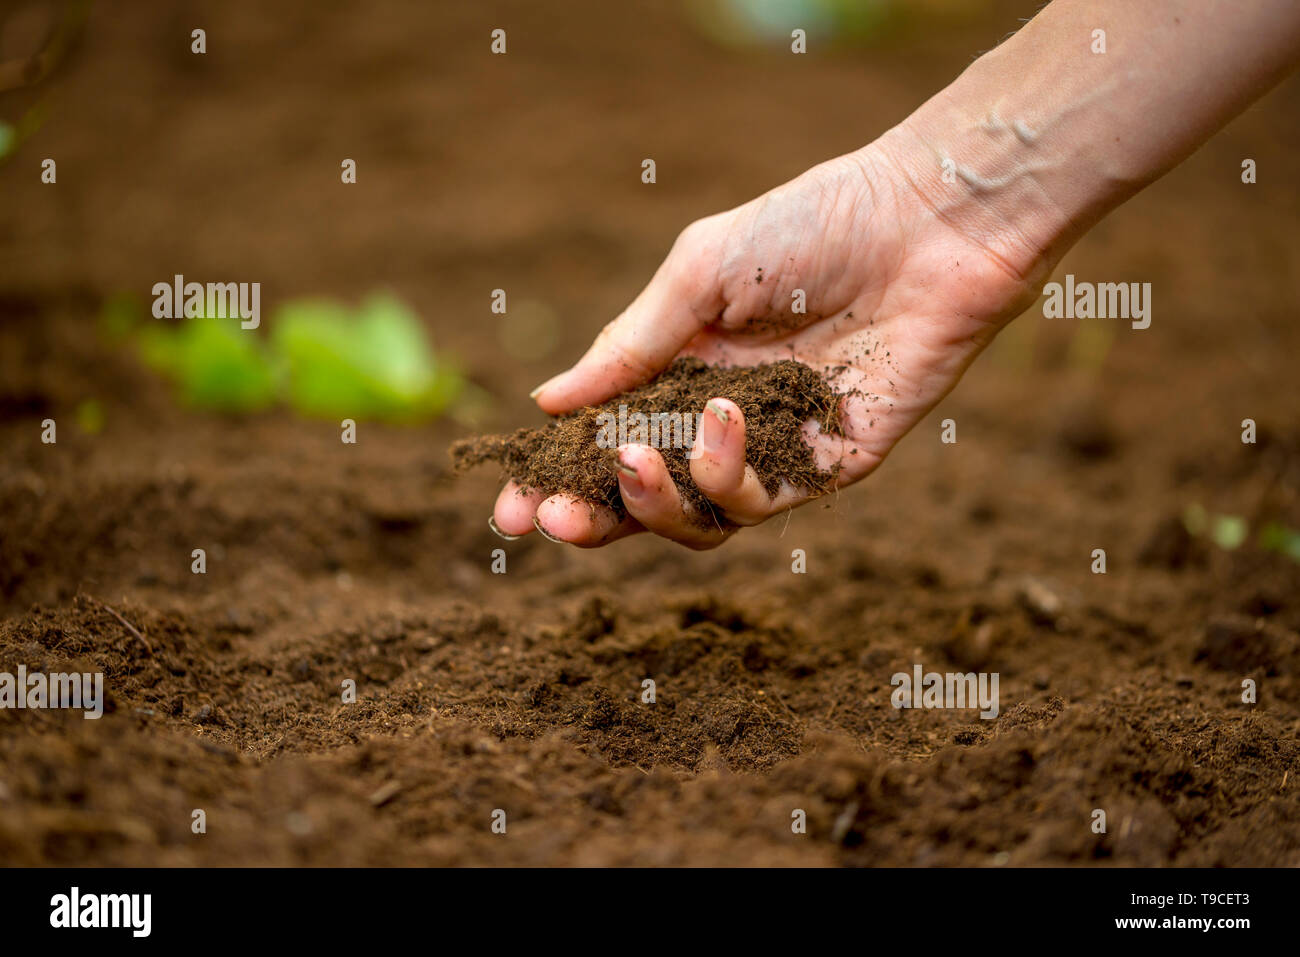 Close up of the hand of a woman holding a handful of rich fertile soil that has been newly dug over or tilled in a concept of conservation of nature a Stock Photo